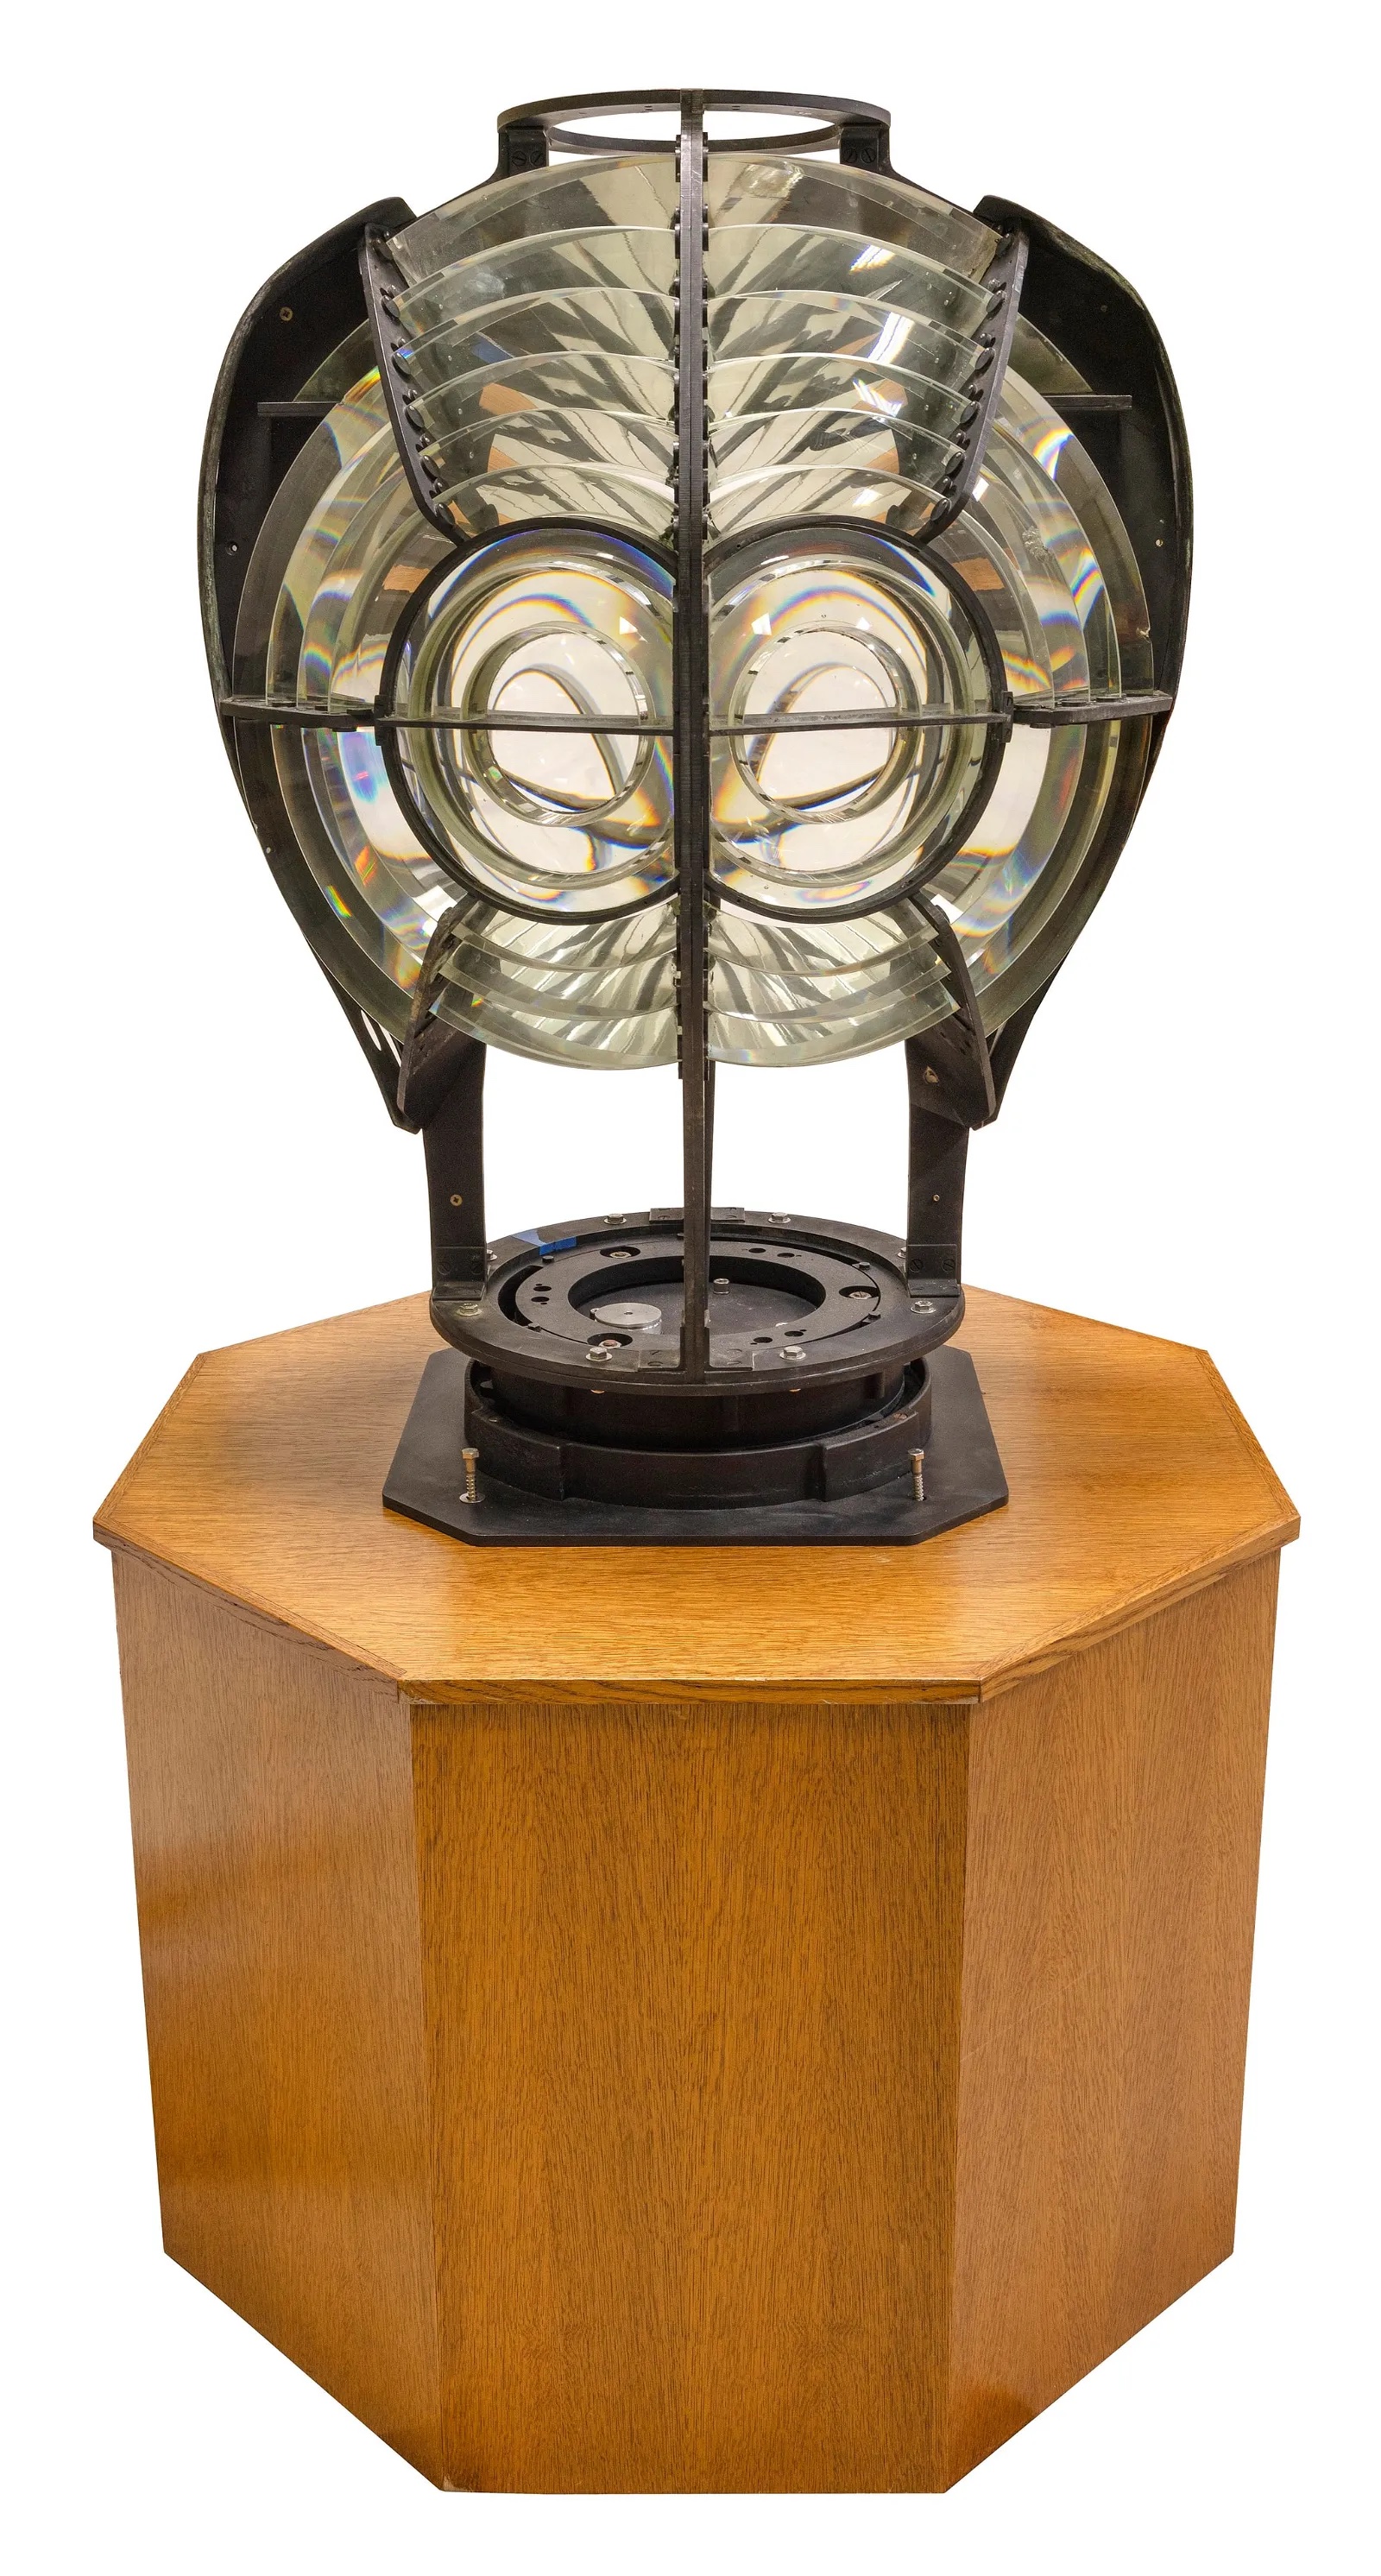 Lighthouse light with Fresnel lenses, estimated at $15,000-$20,000 at Eldred's.